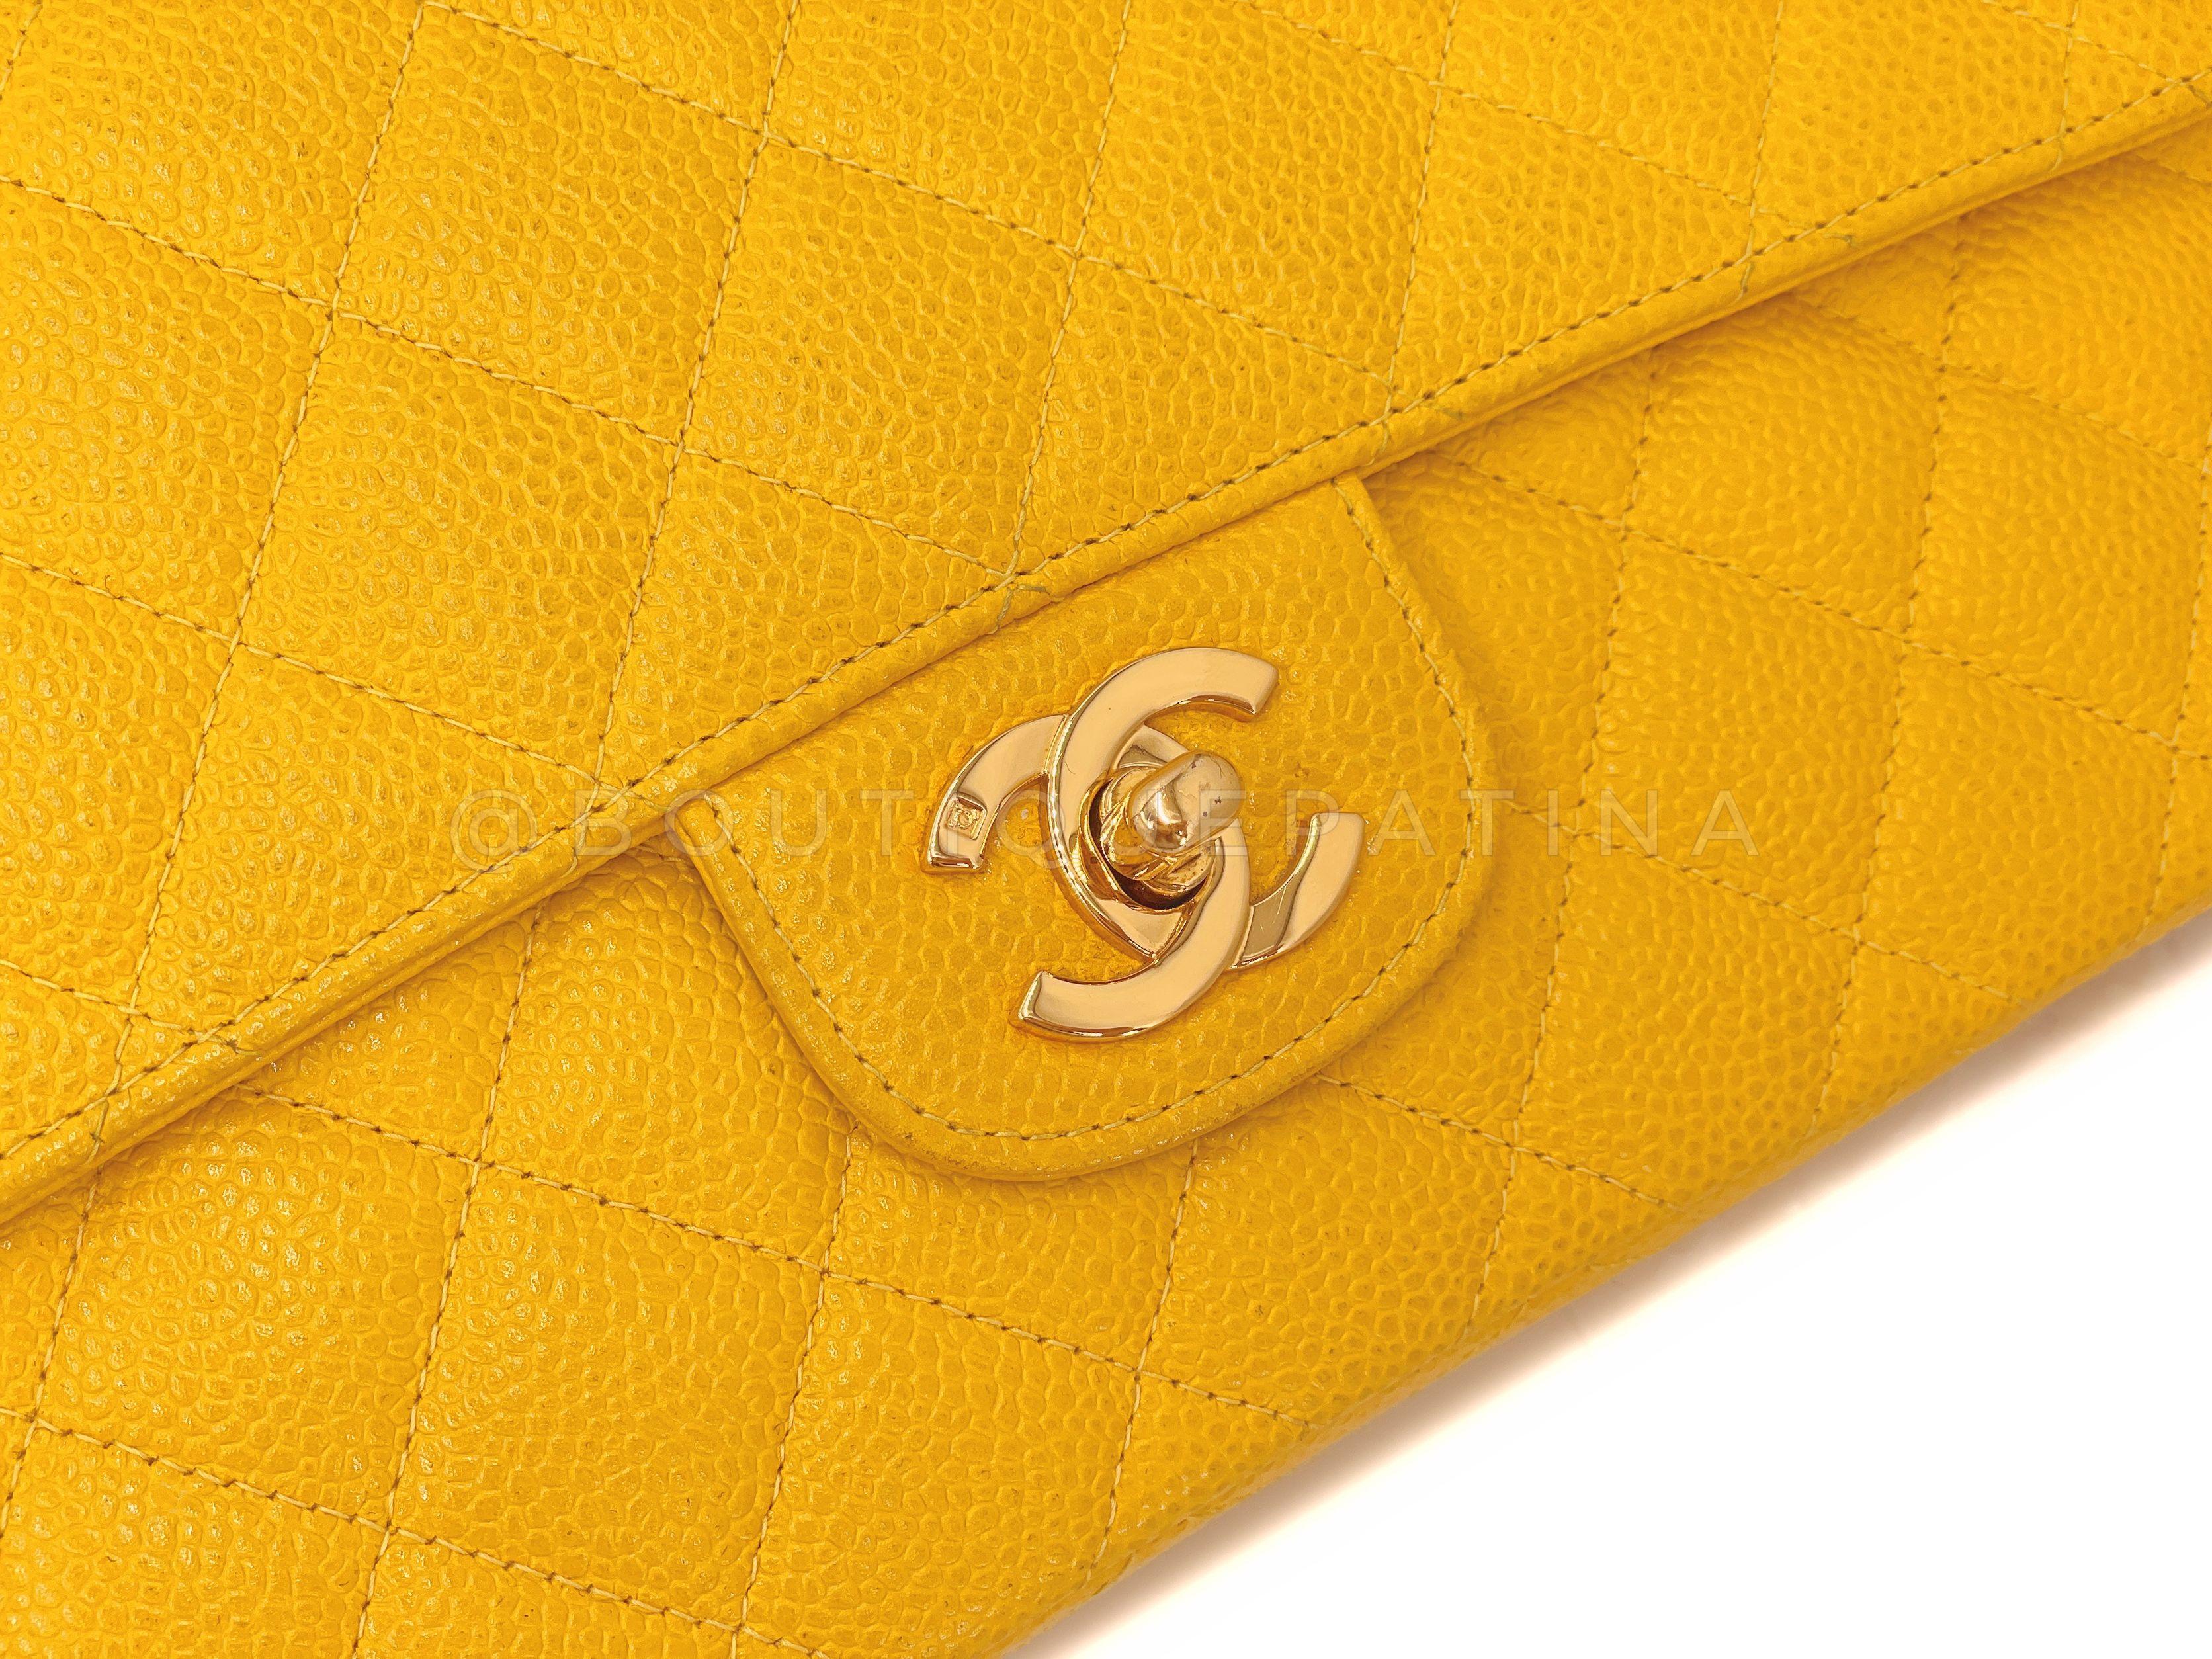 Chanel 1997 Vintage Canary Yellow Caviar Kelly Flap Parent Bag 24k GHW 66771 For Sale 5